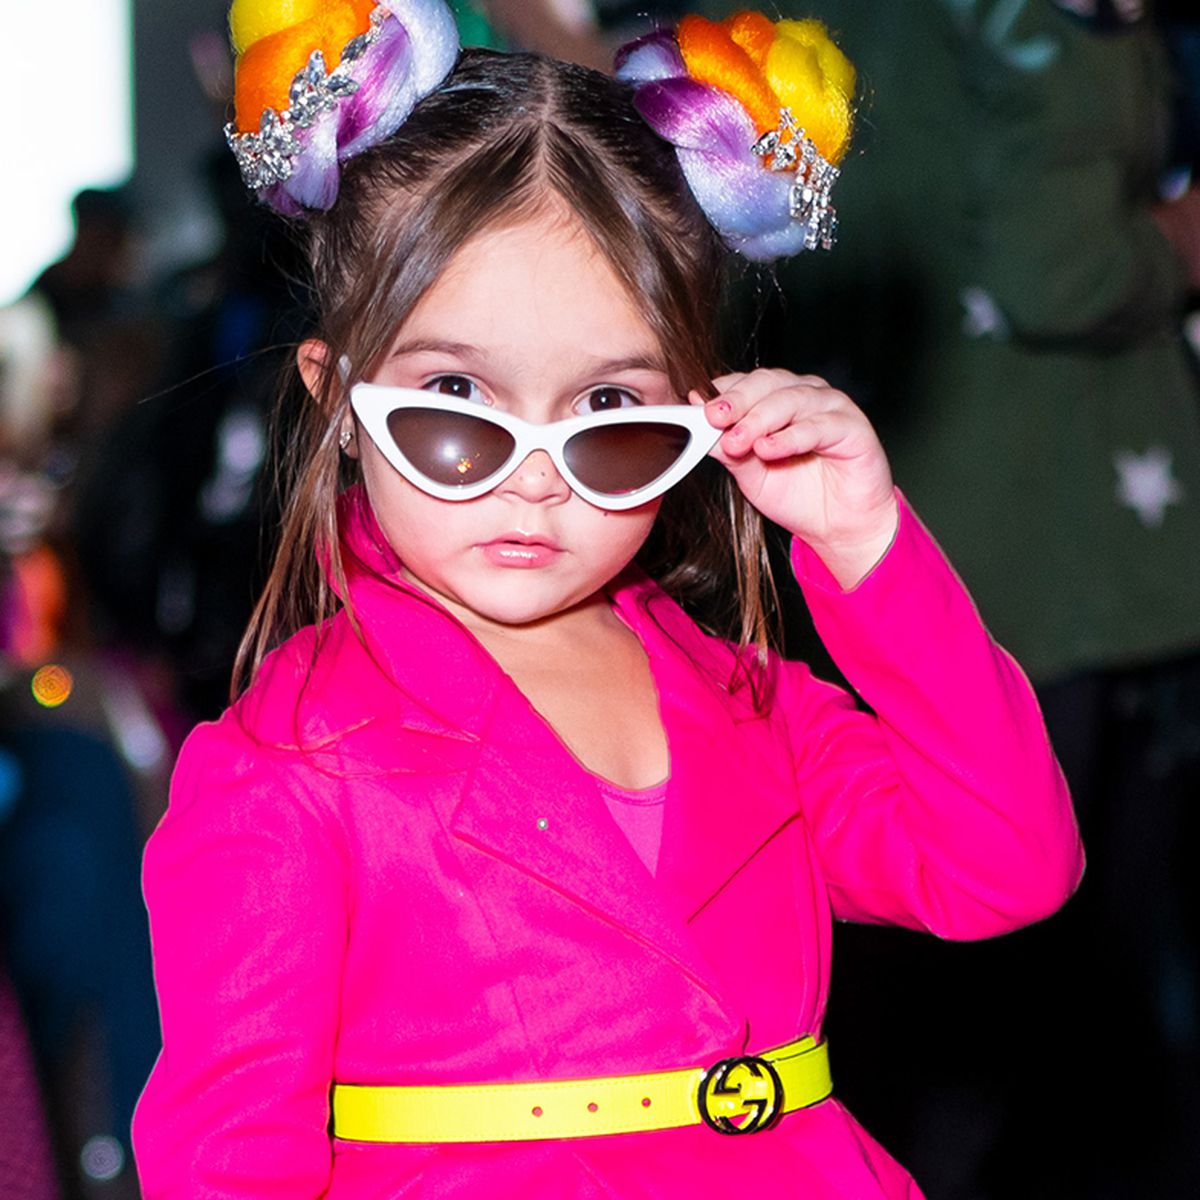 Meet the 10-year-old fashion influencer